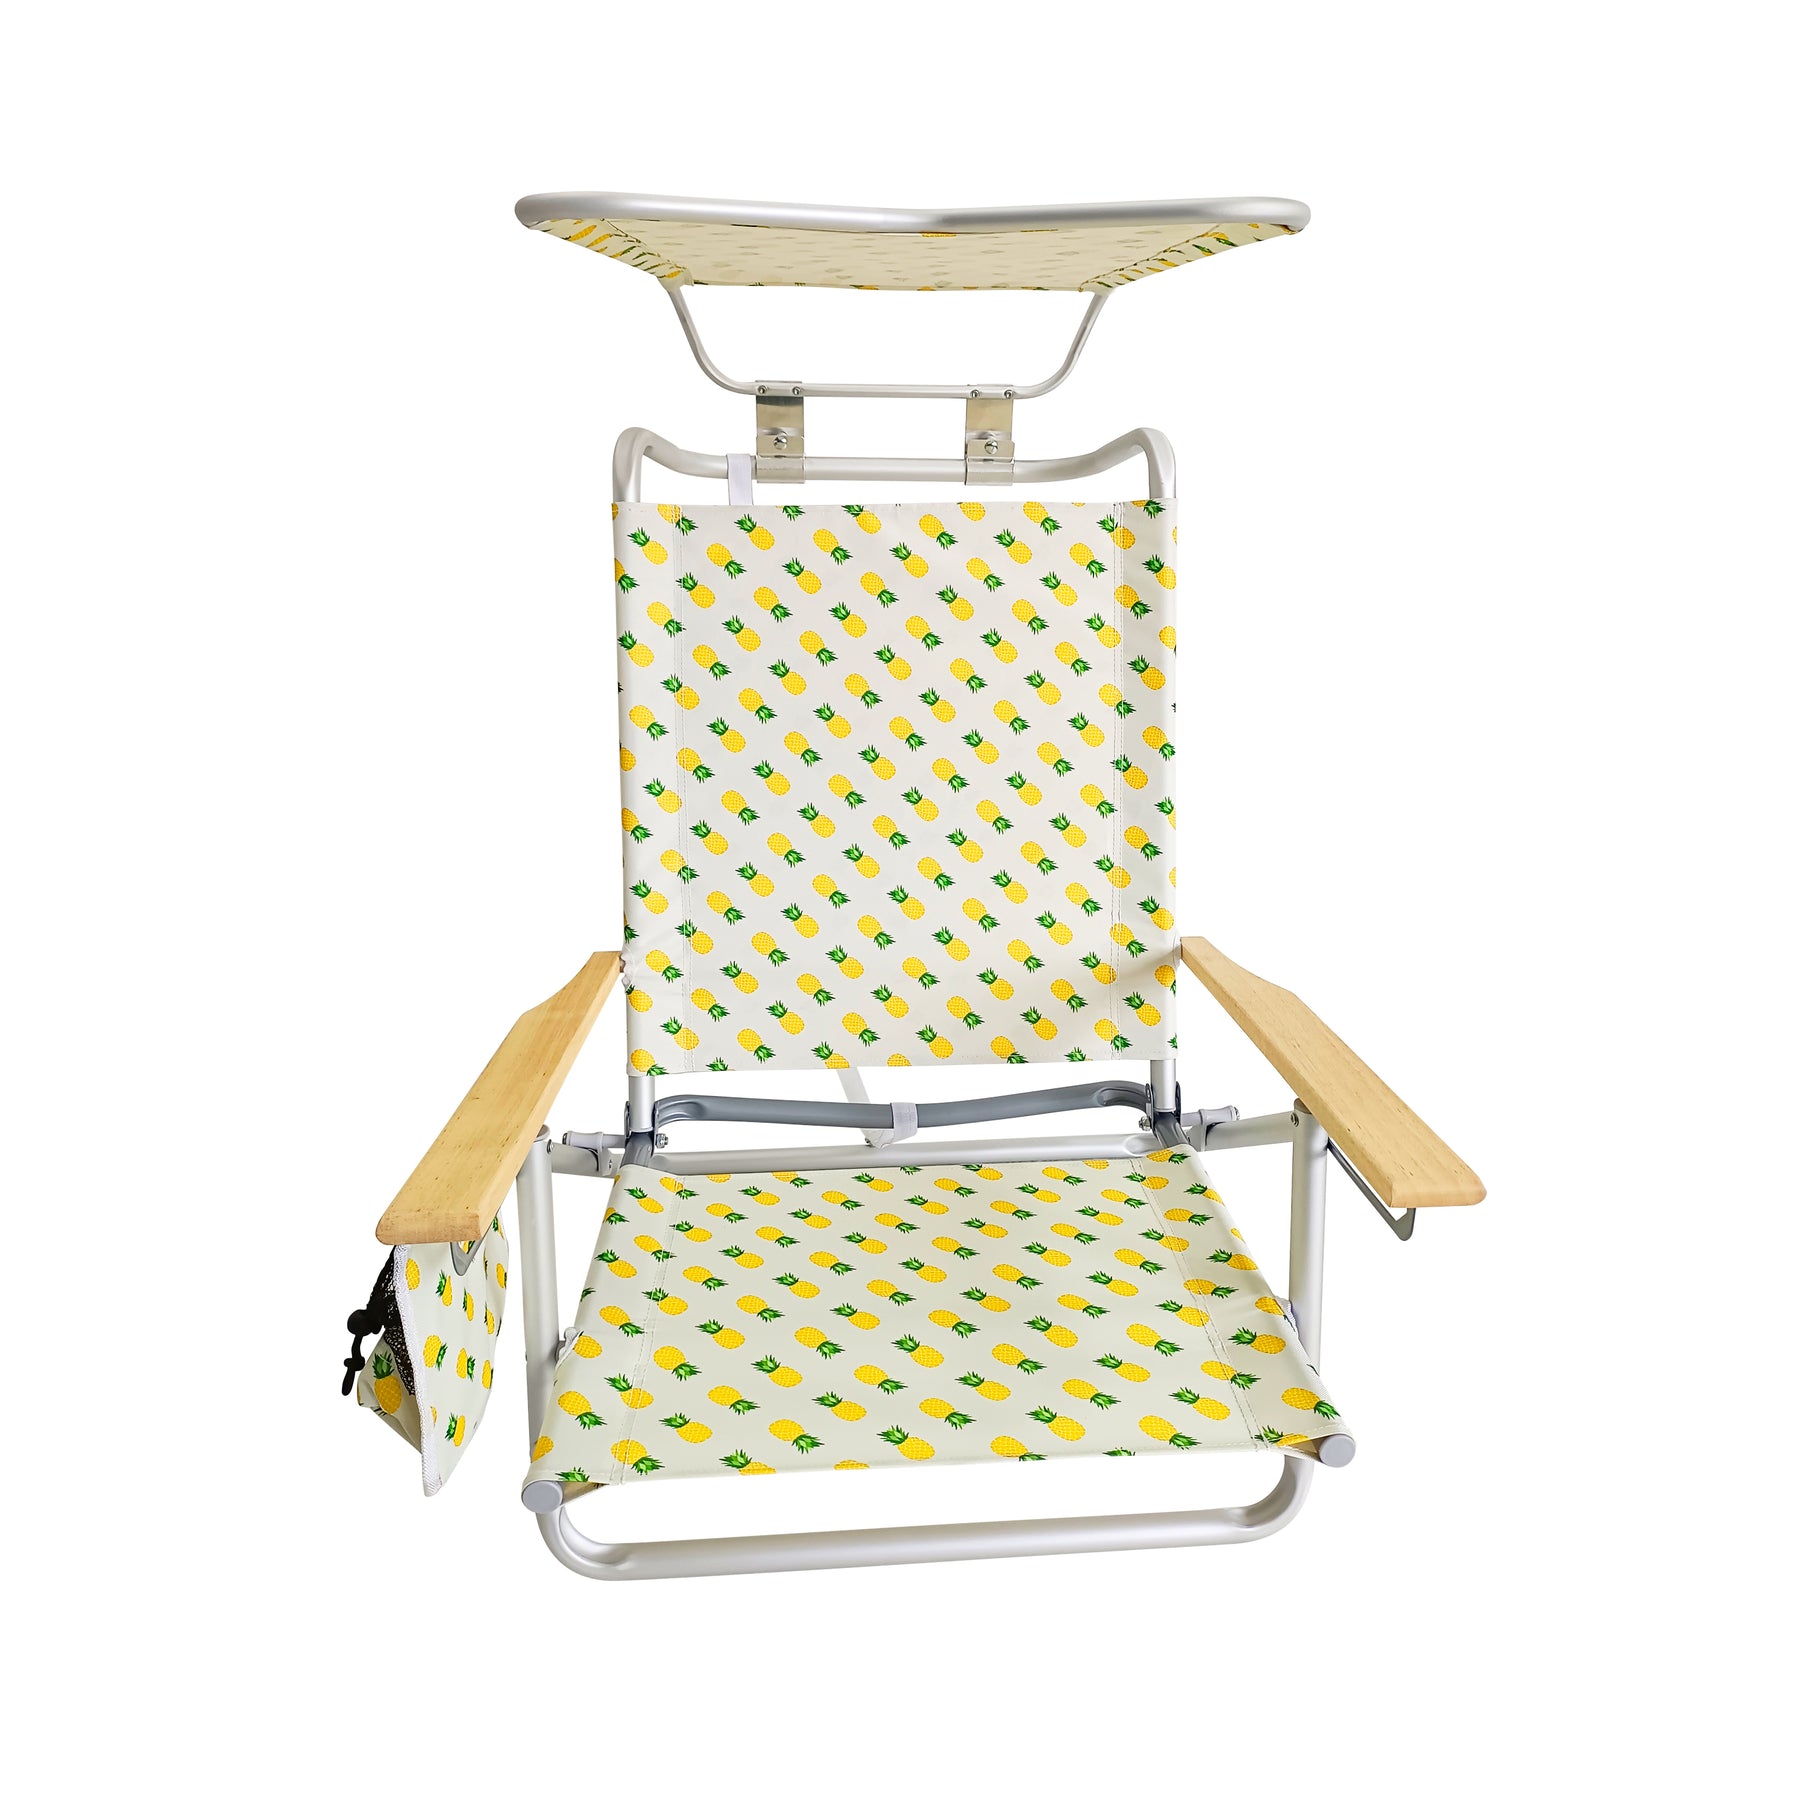 Front view of the Bliss Hammocks Folding Beach Chair with Canopy, storage pouch, phone holder, cup holder, and shoulder straps in the pineapple variation.